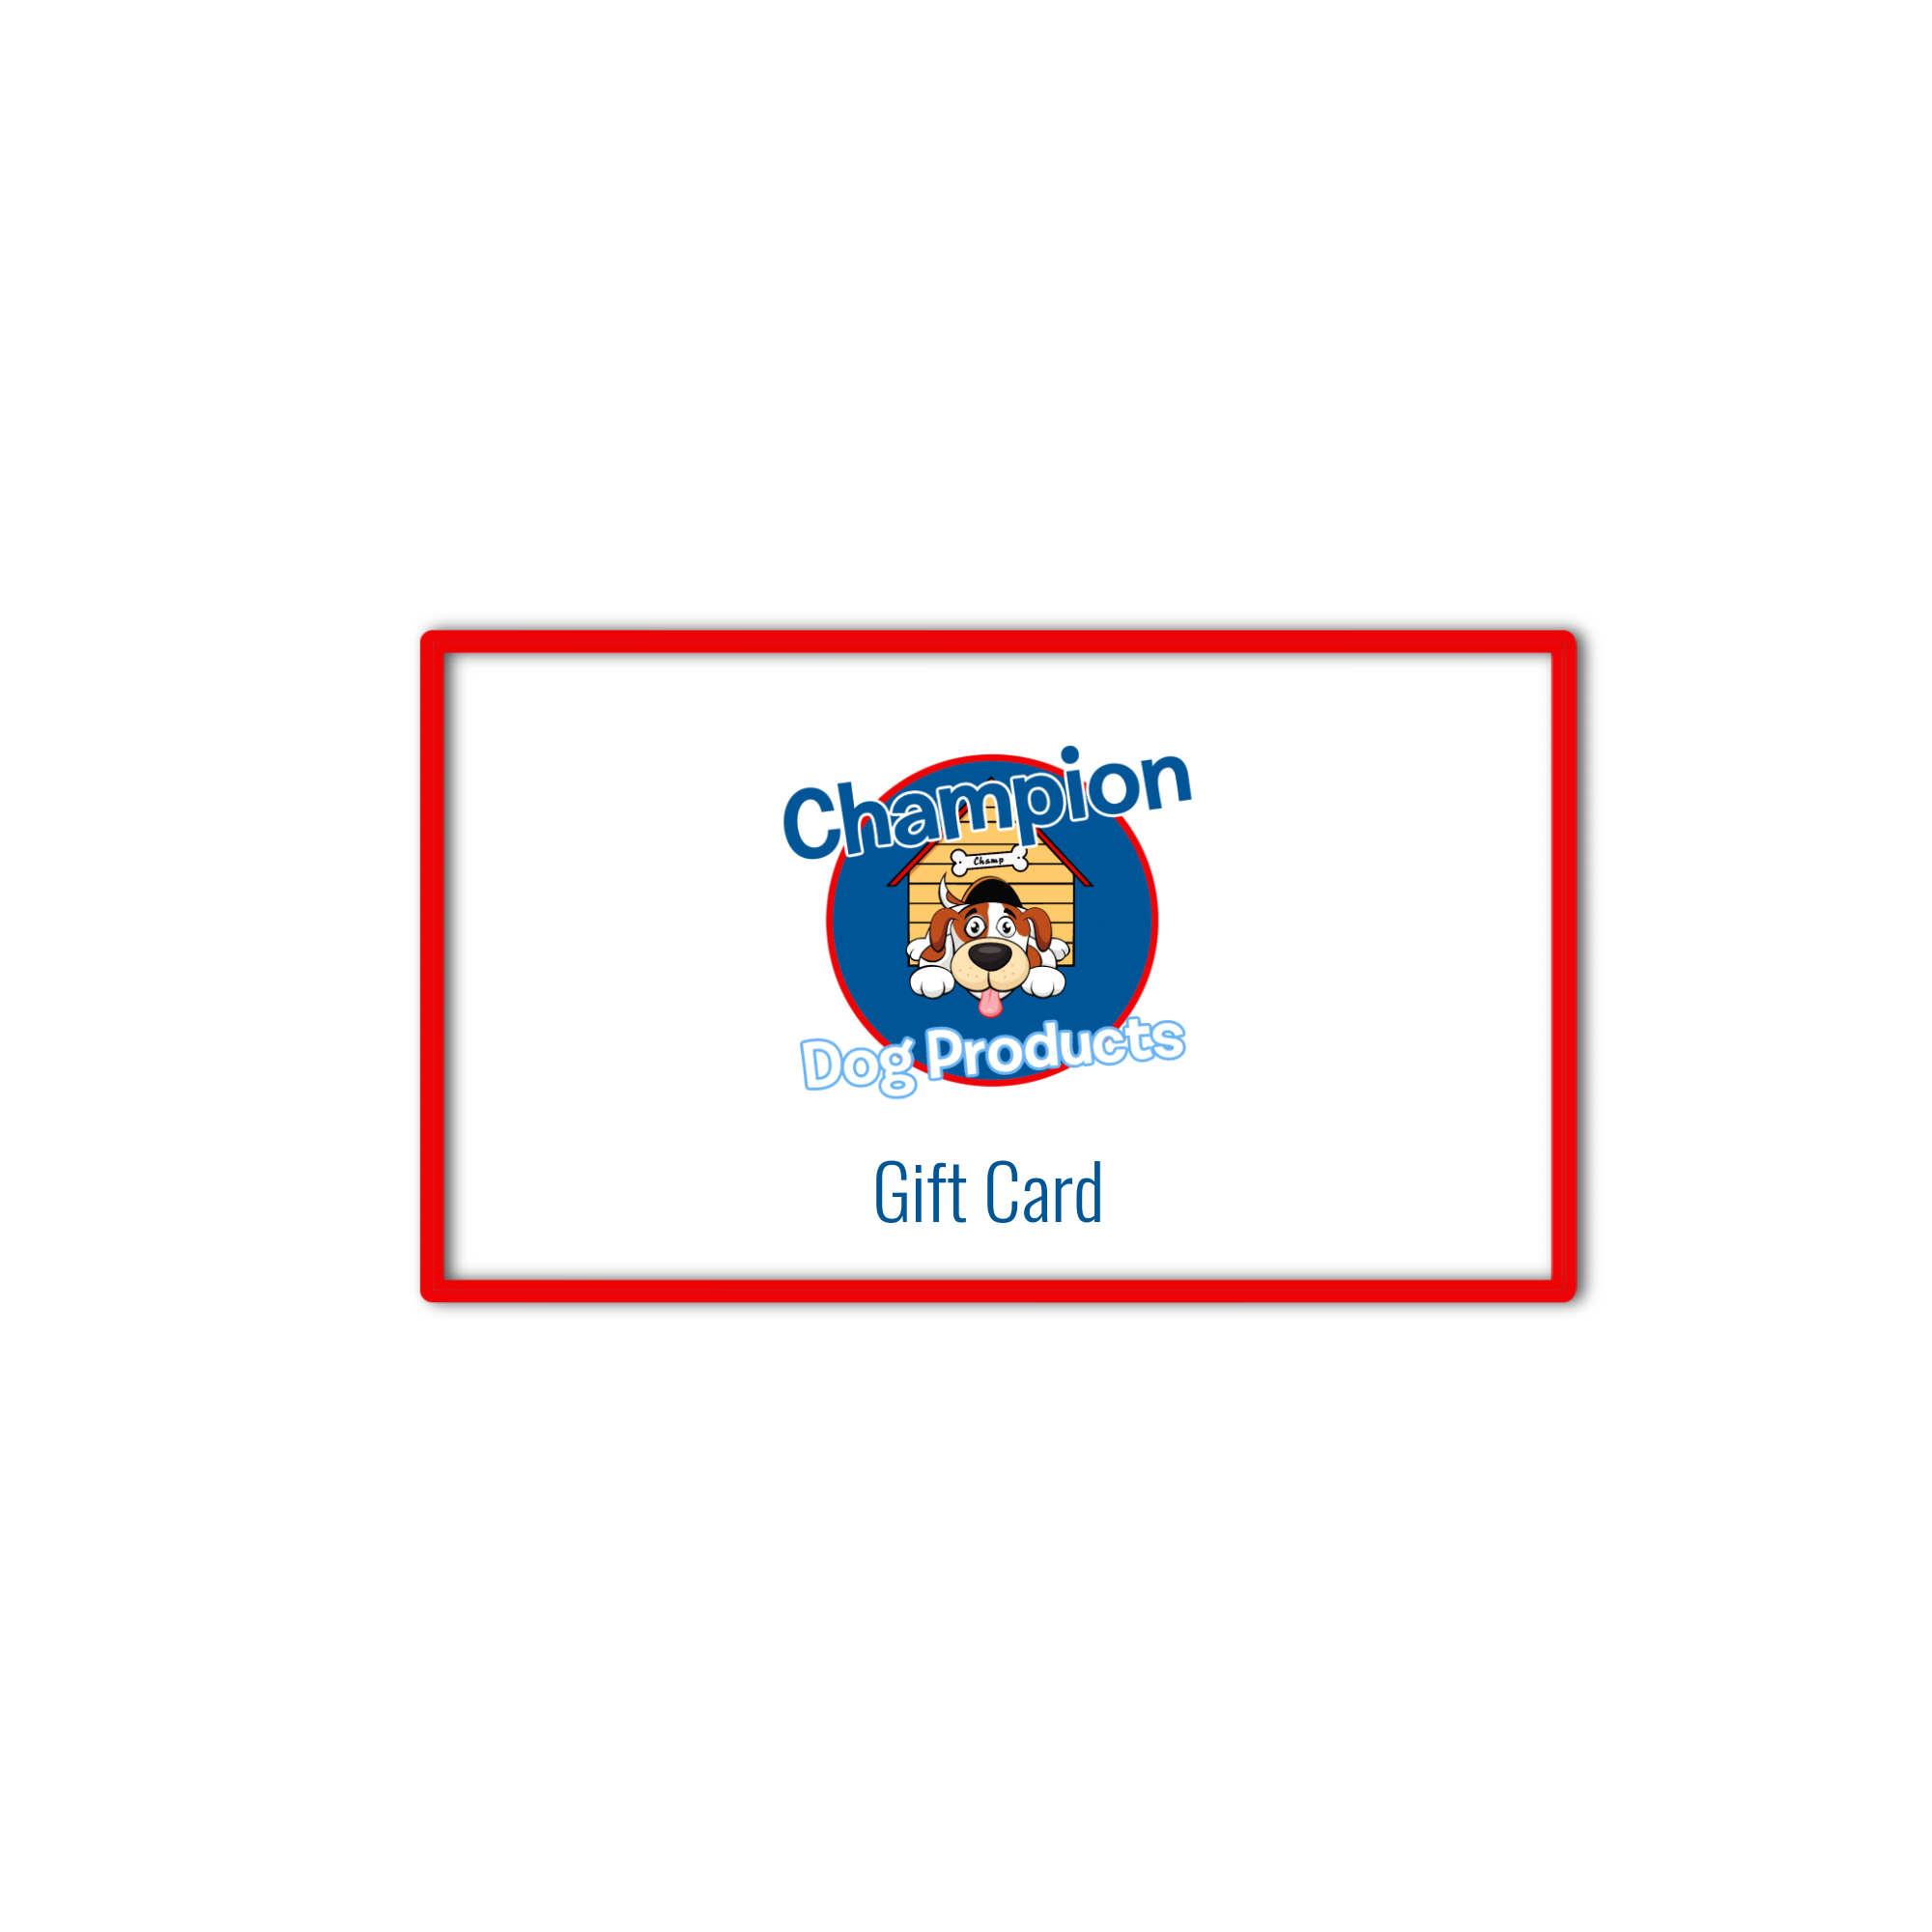 Champion Dog Products Gift Card